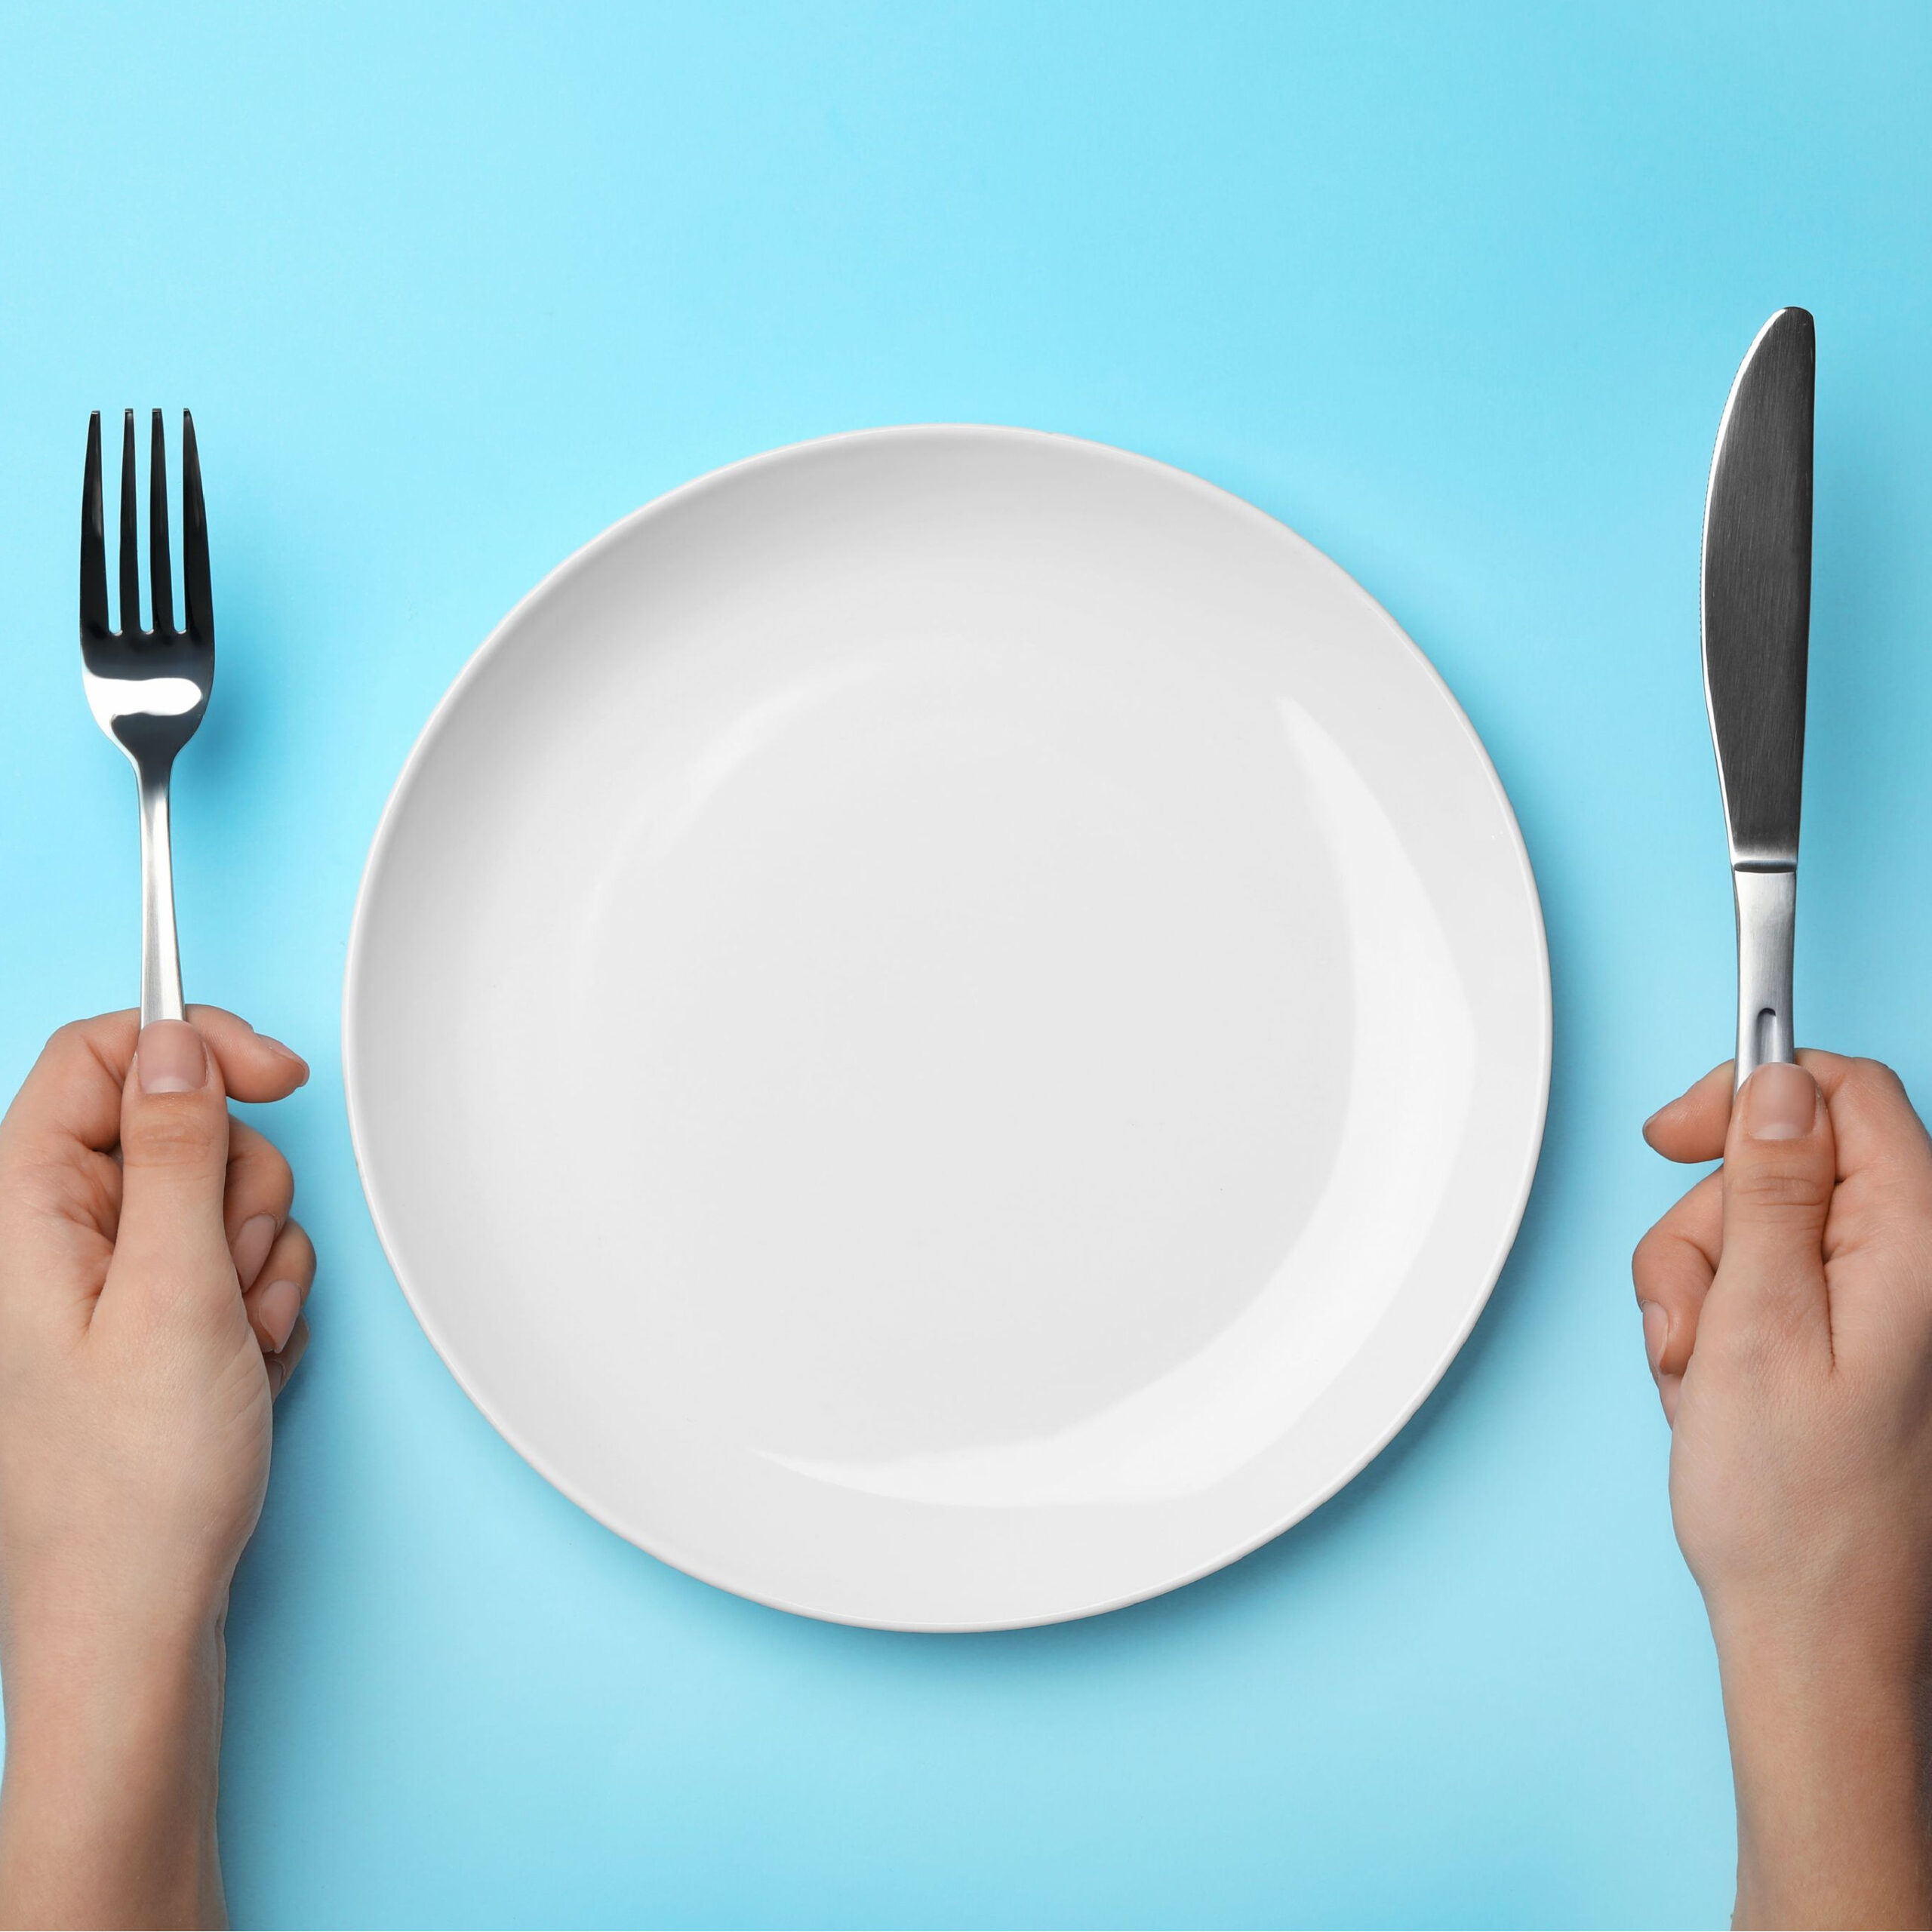 empty plate with utensils